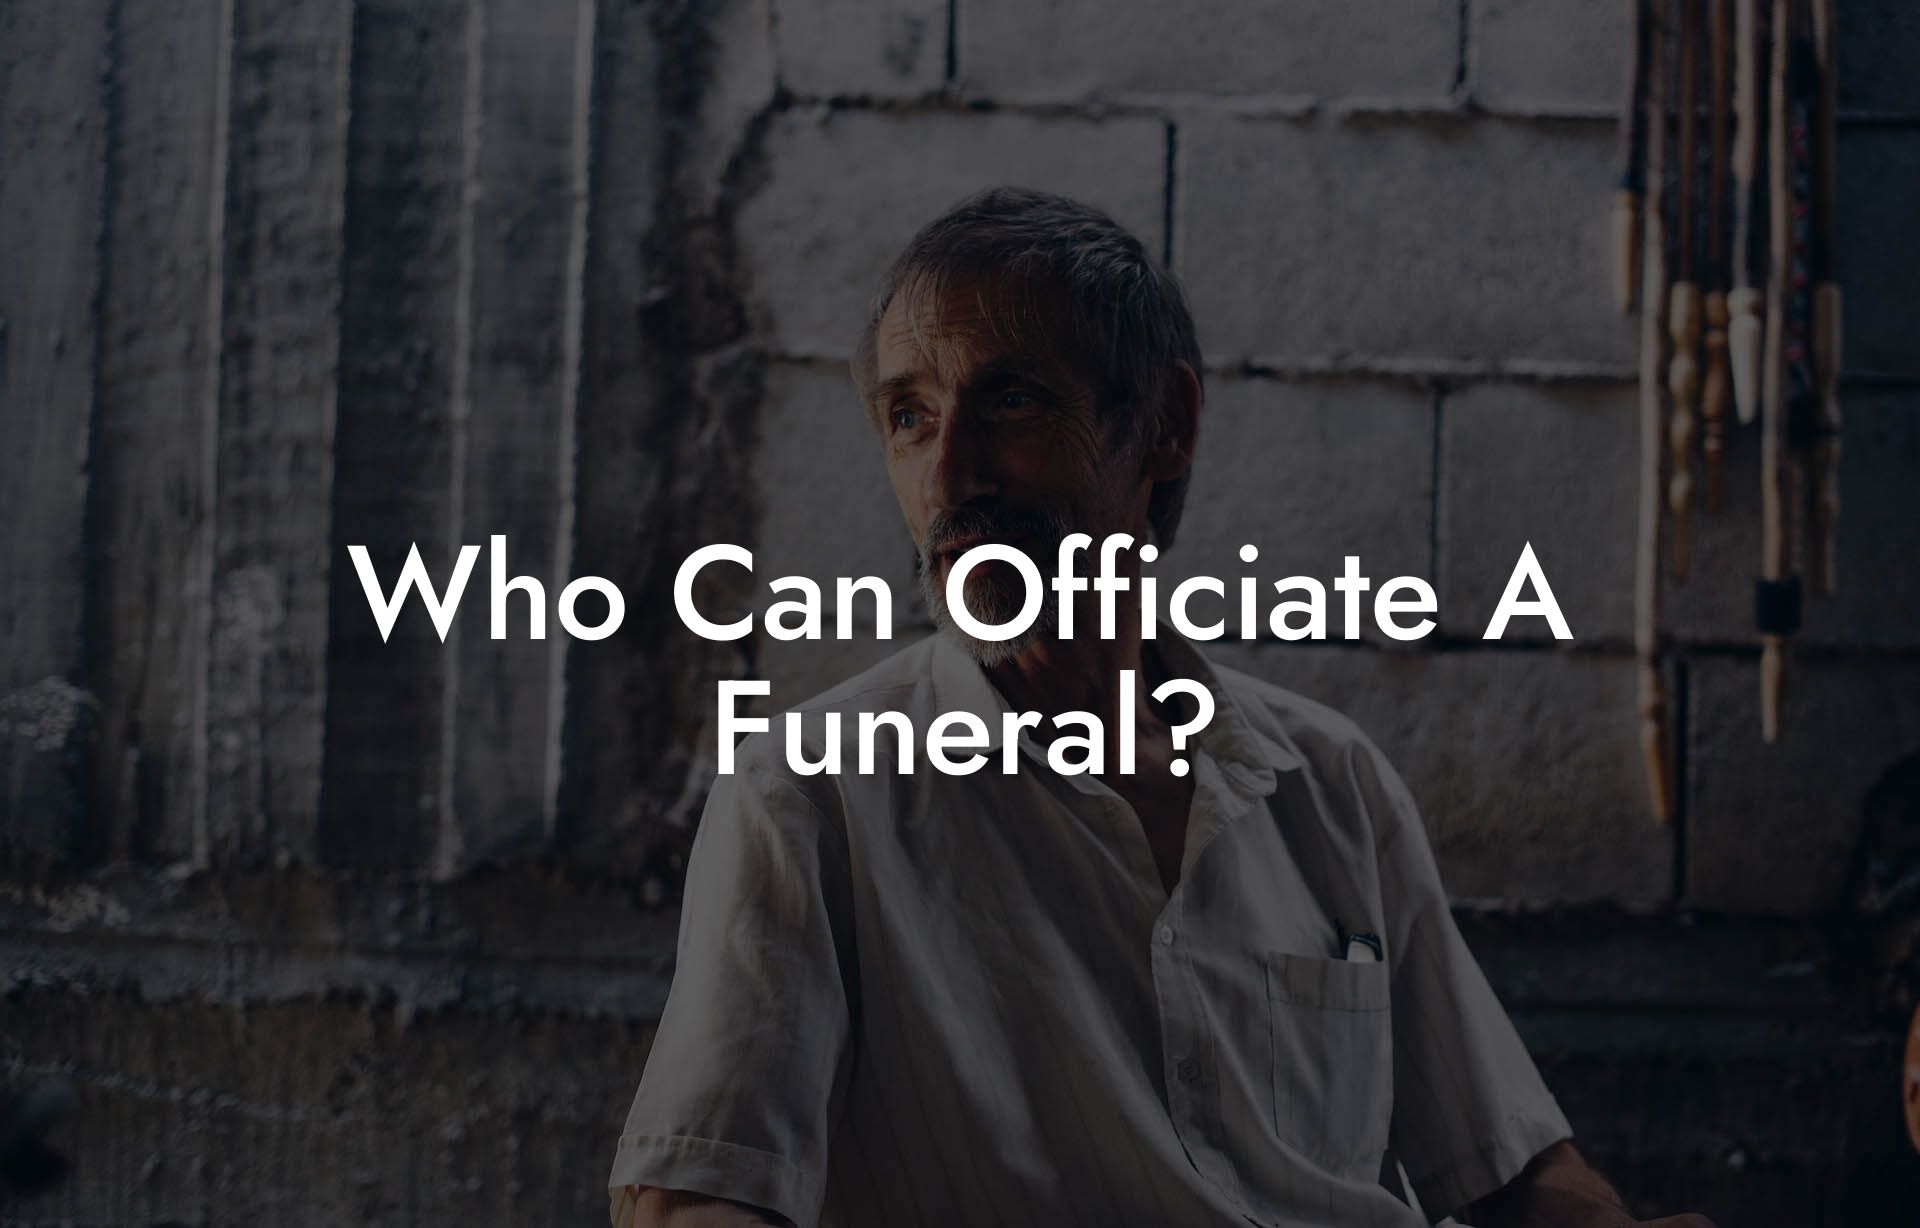 Who Can Officiate A Funeral?